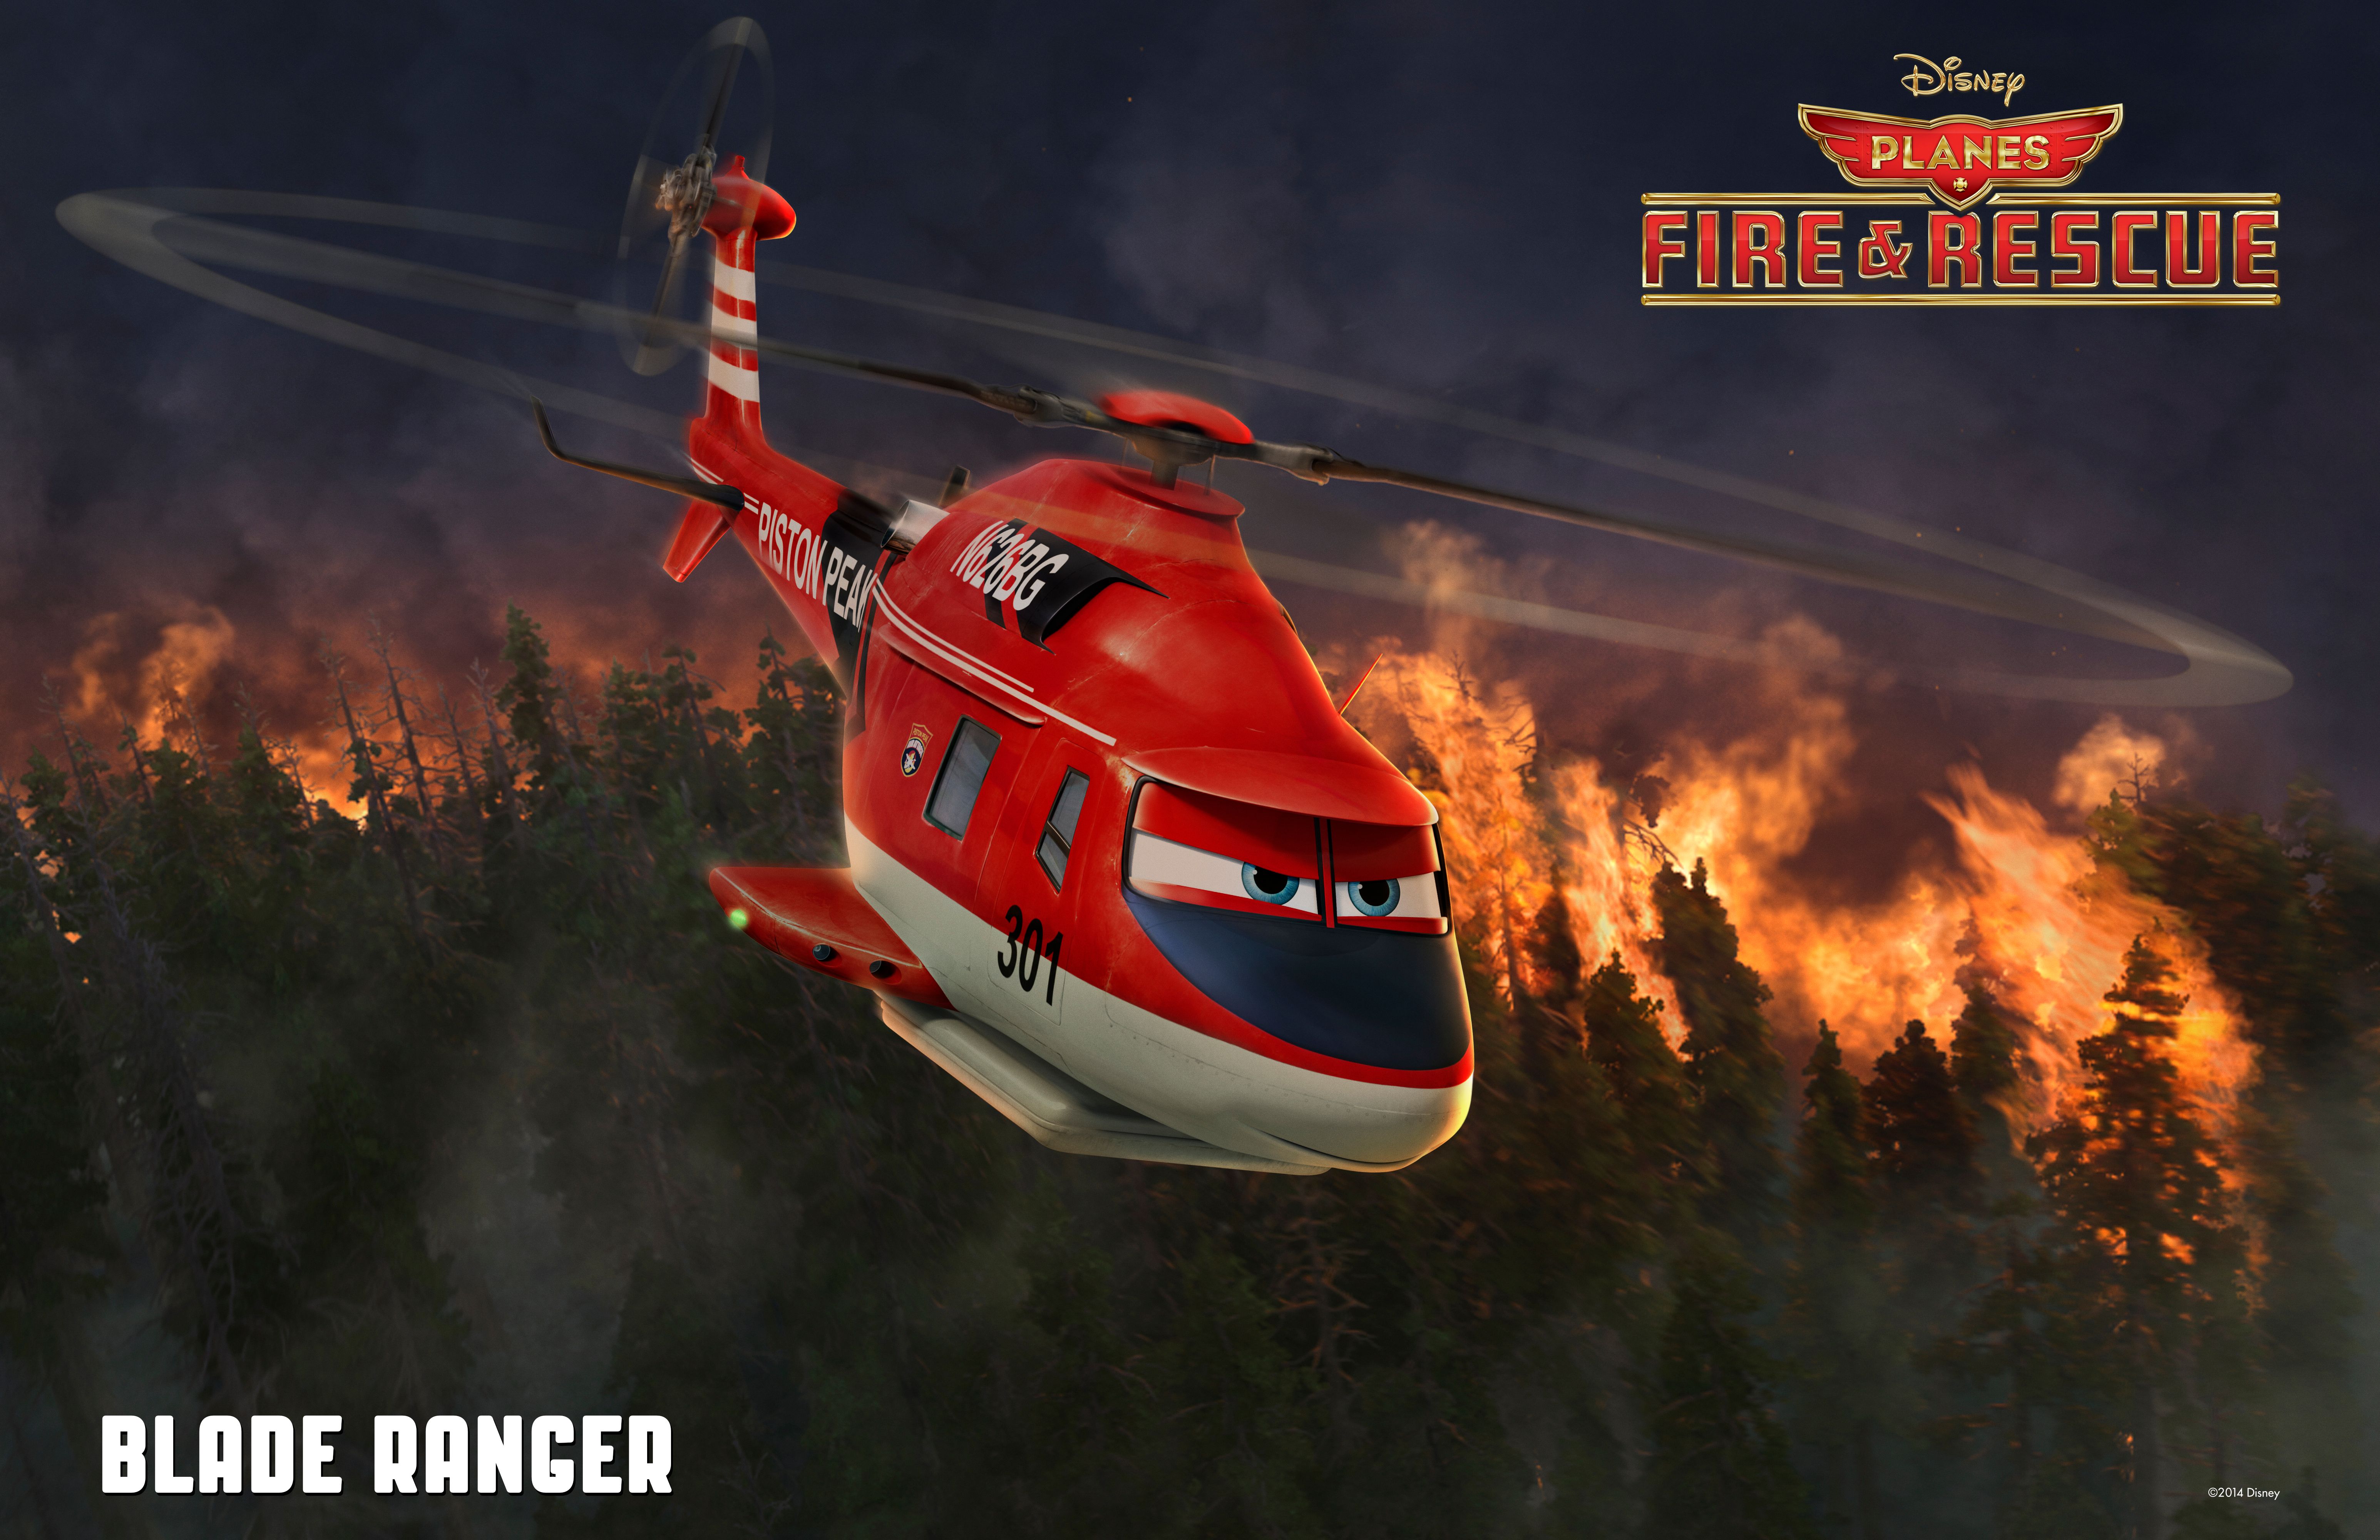 Planes Fire and Rescue Blade Ranger Photo